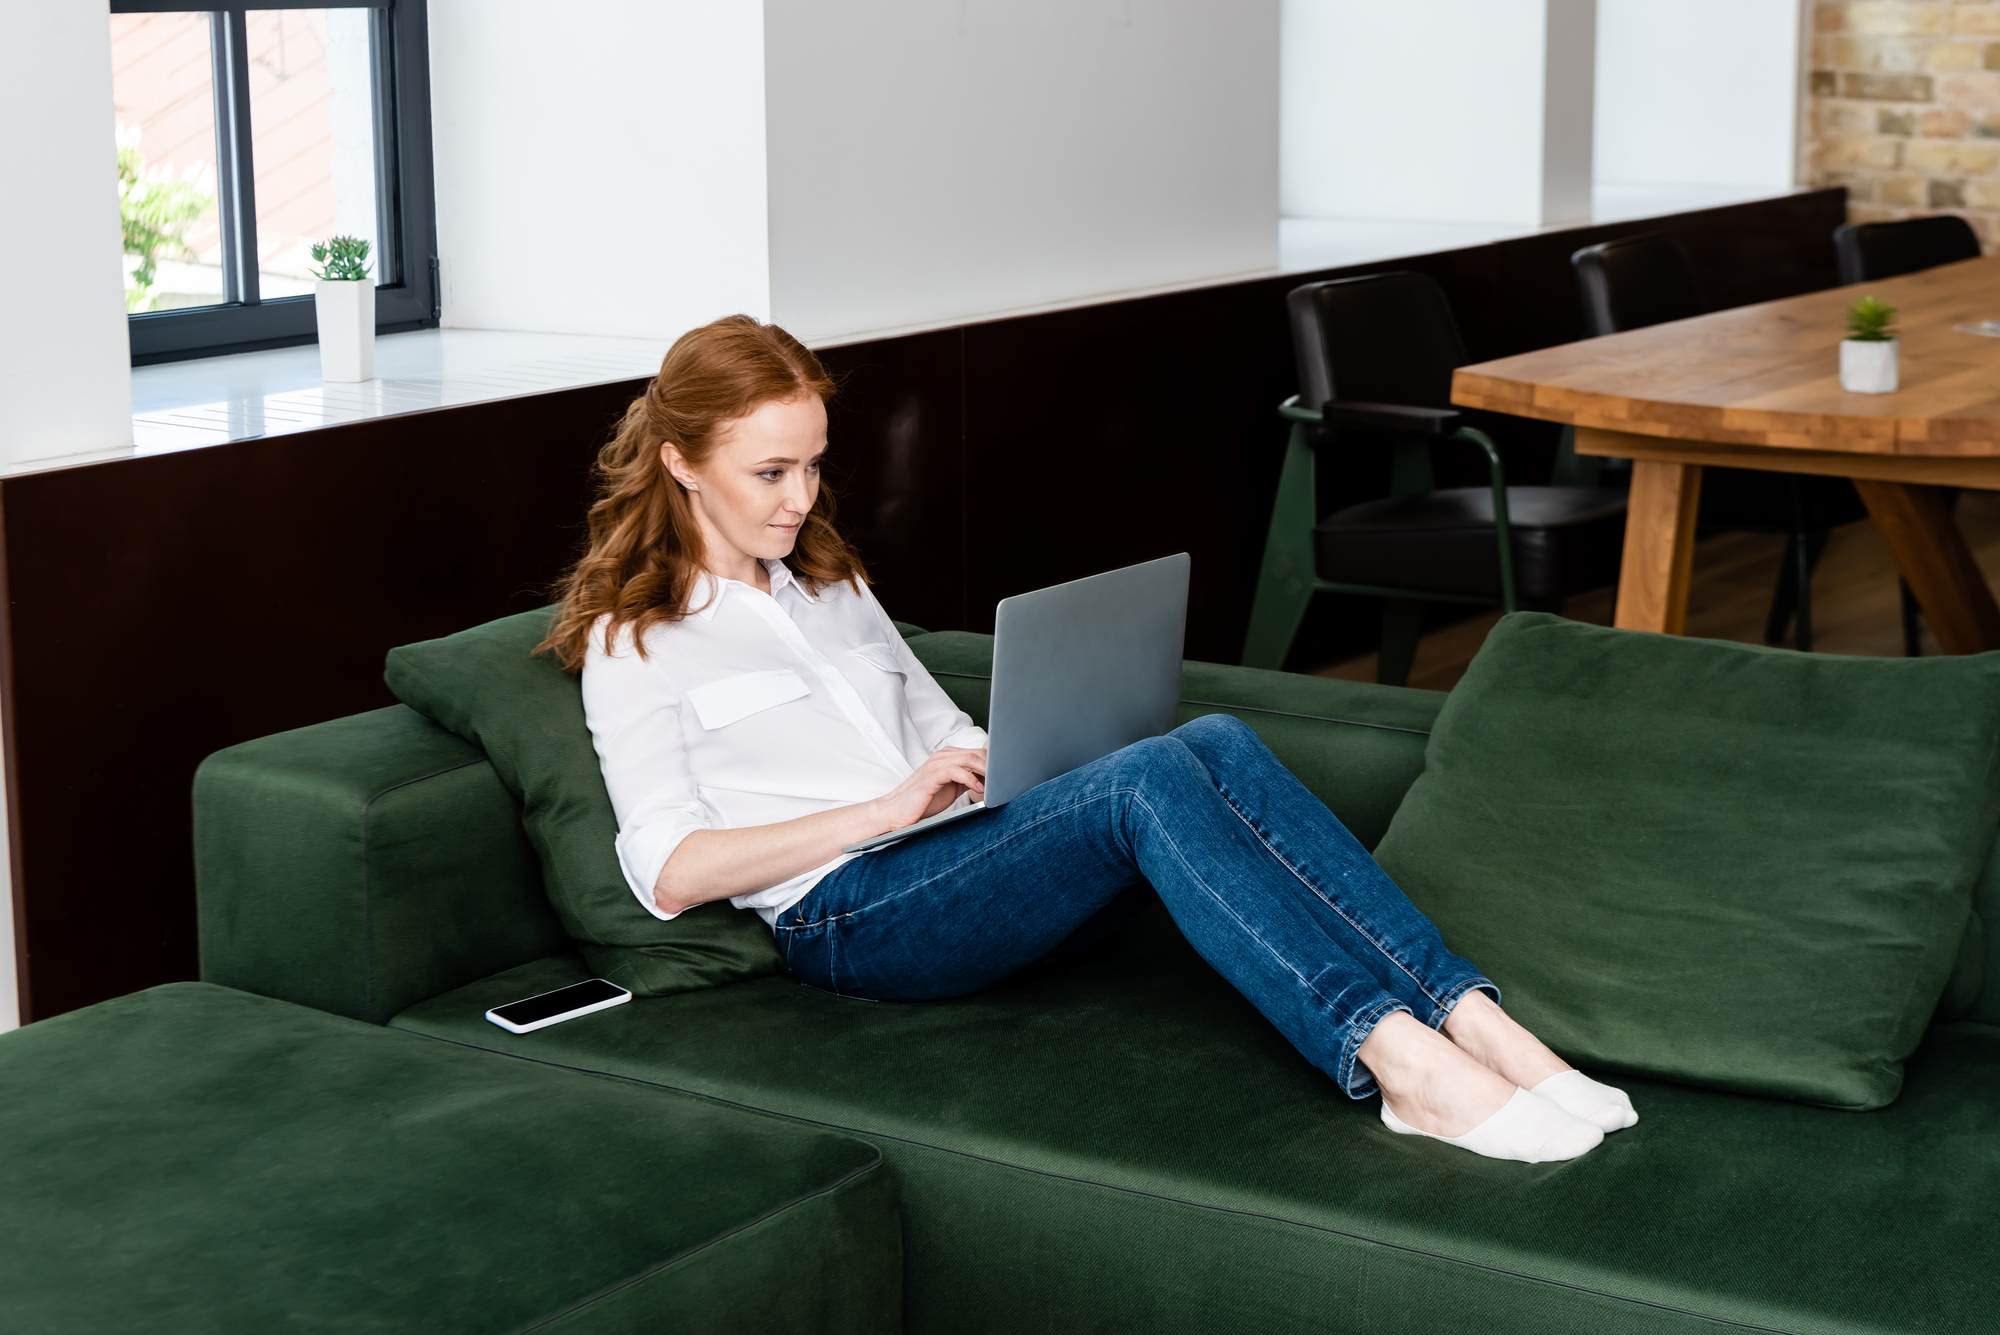 A woman sitting on a green couch with a laptop.